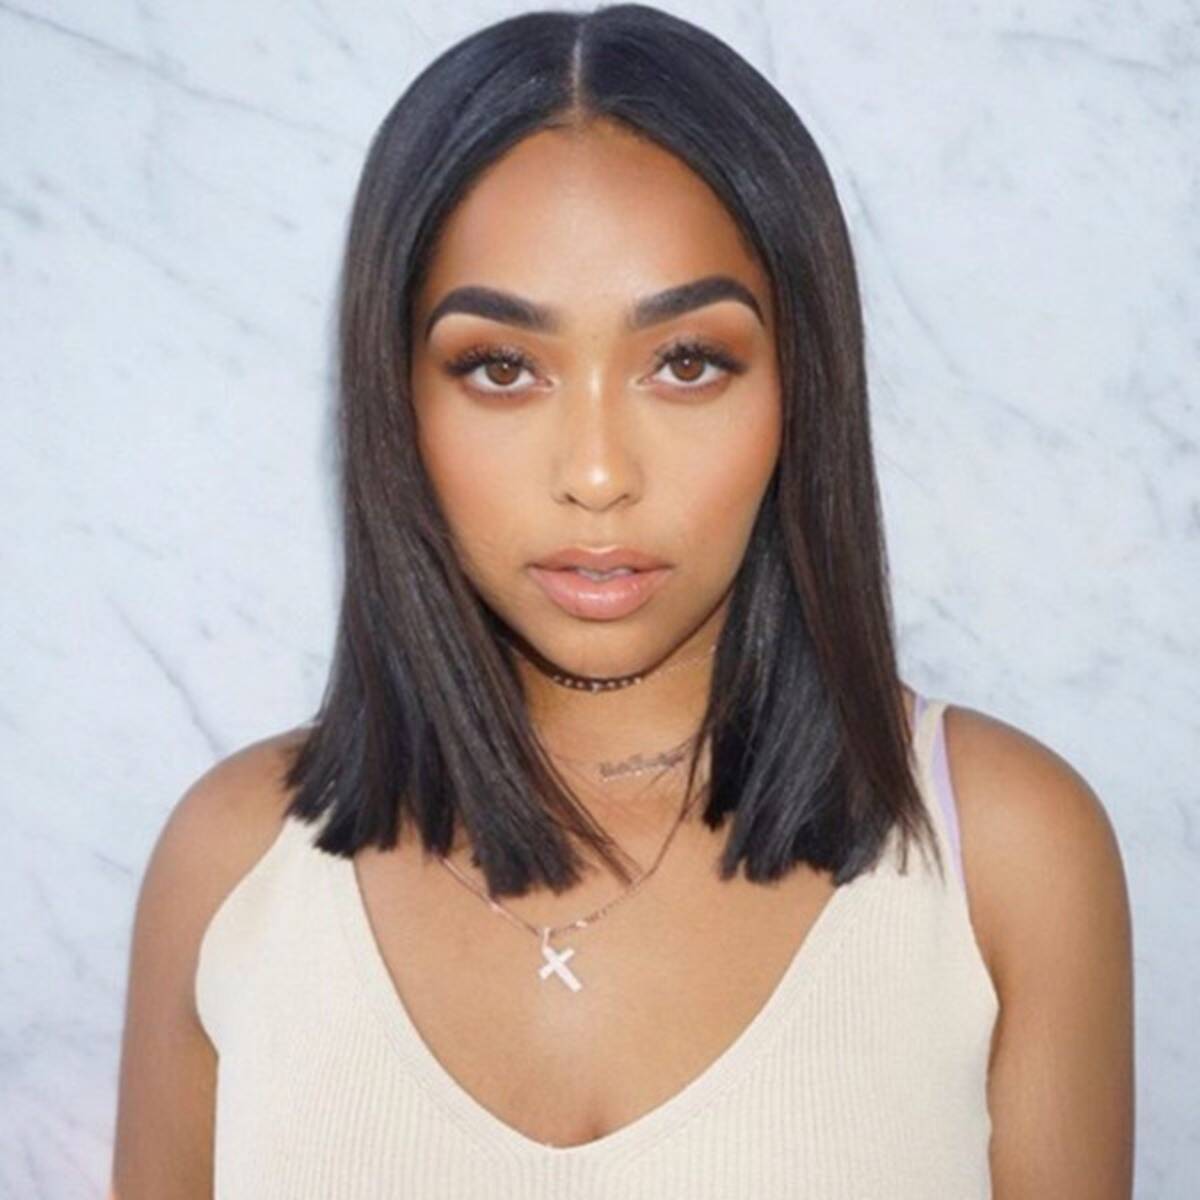 Jordyn Woods Brought In The New Year While Twerking Like Crazy - See The Video